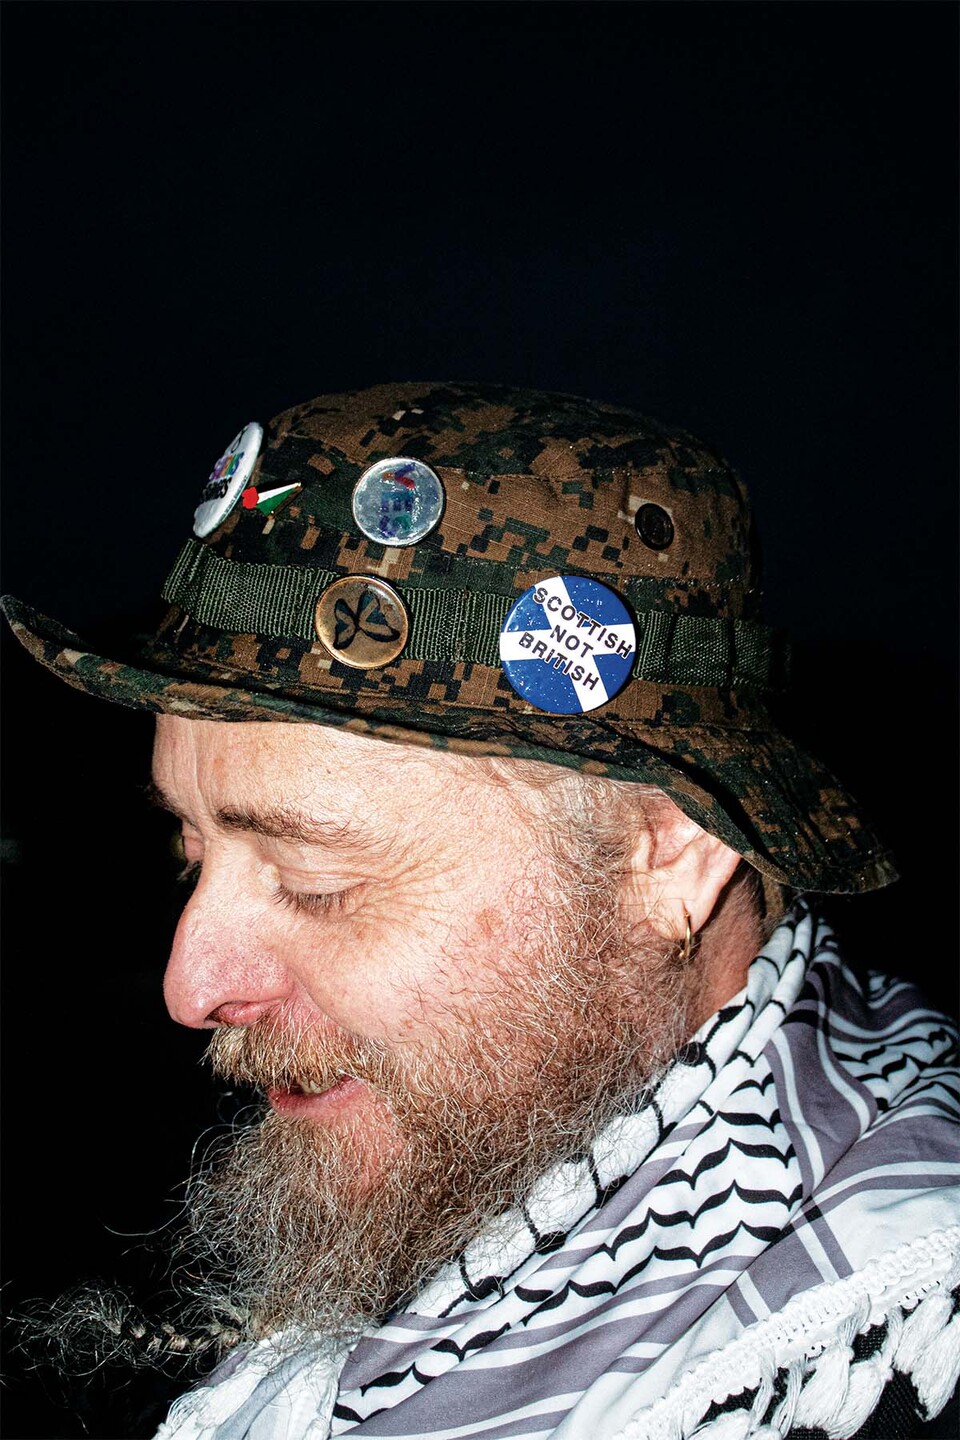 Old bearded man wearing a keffiyeh and a hat with prominent 'Scottish not British' badge attached